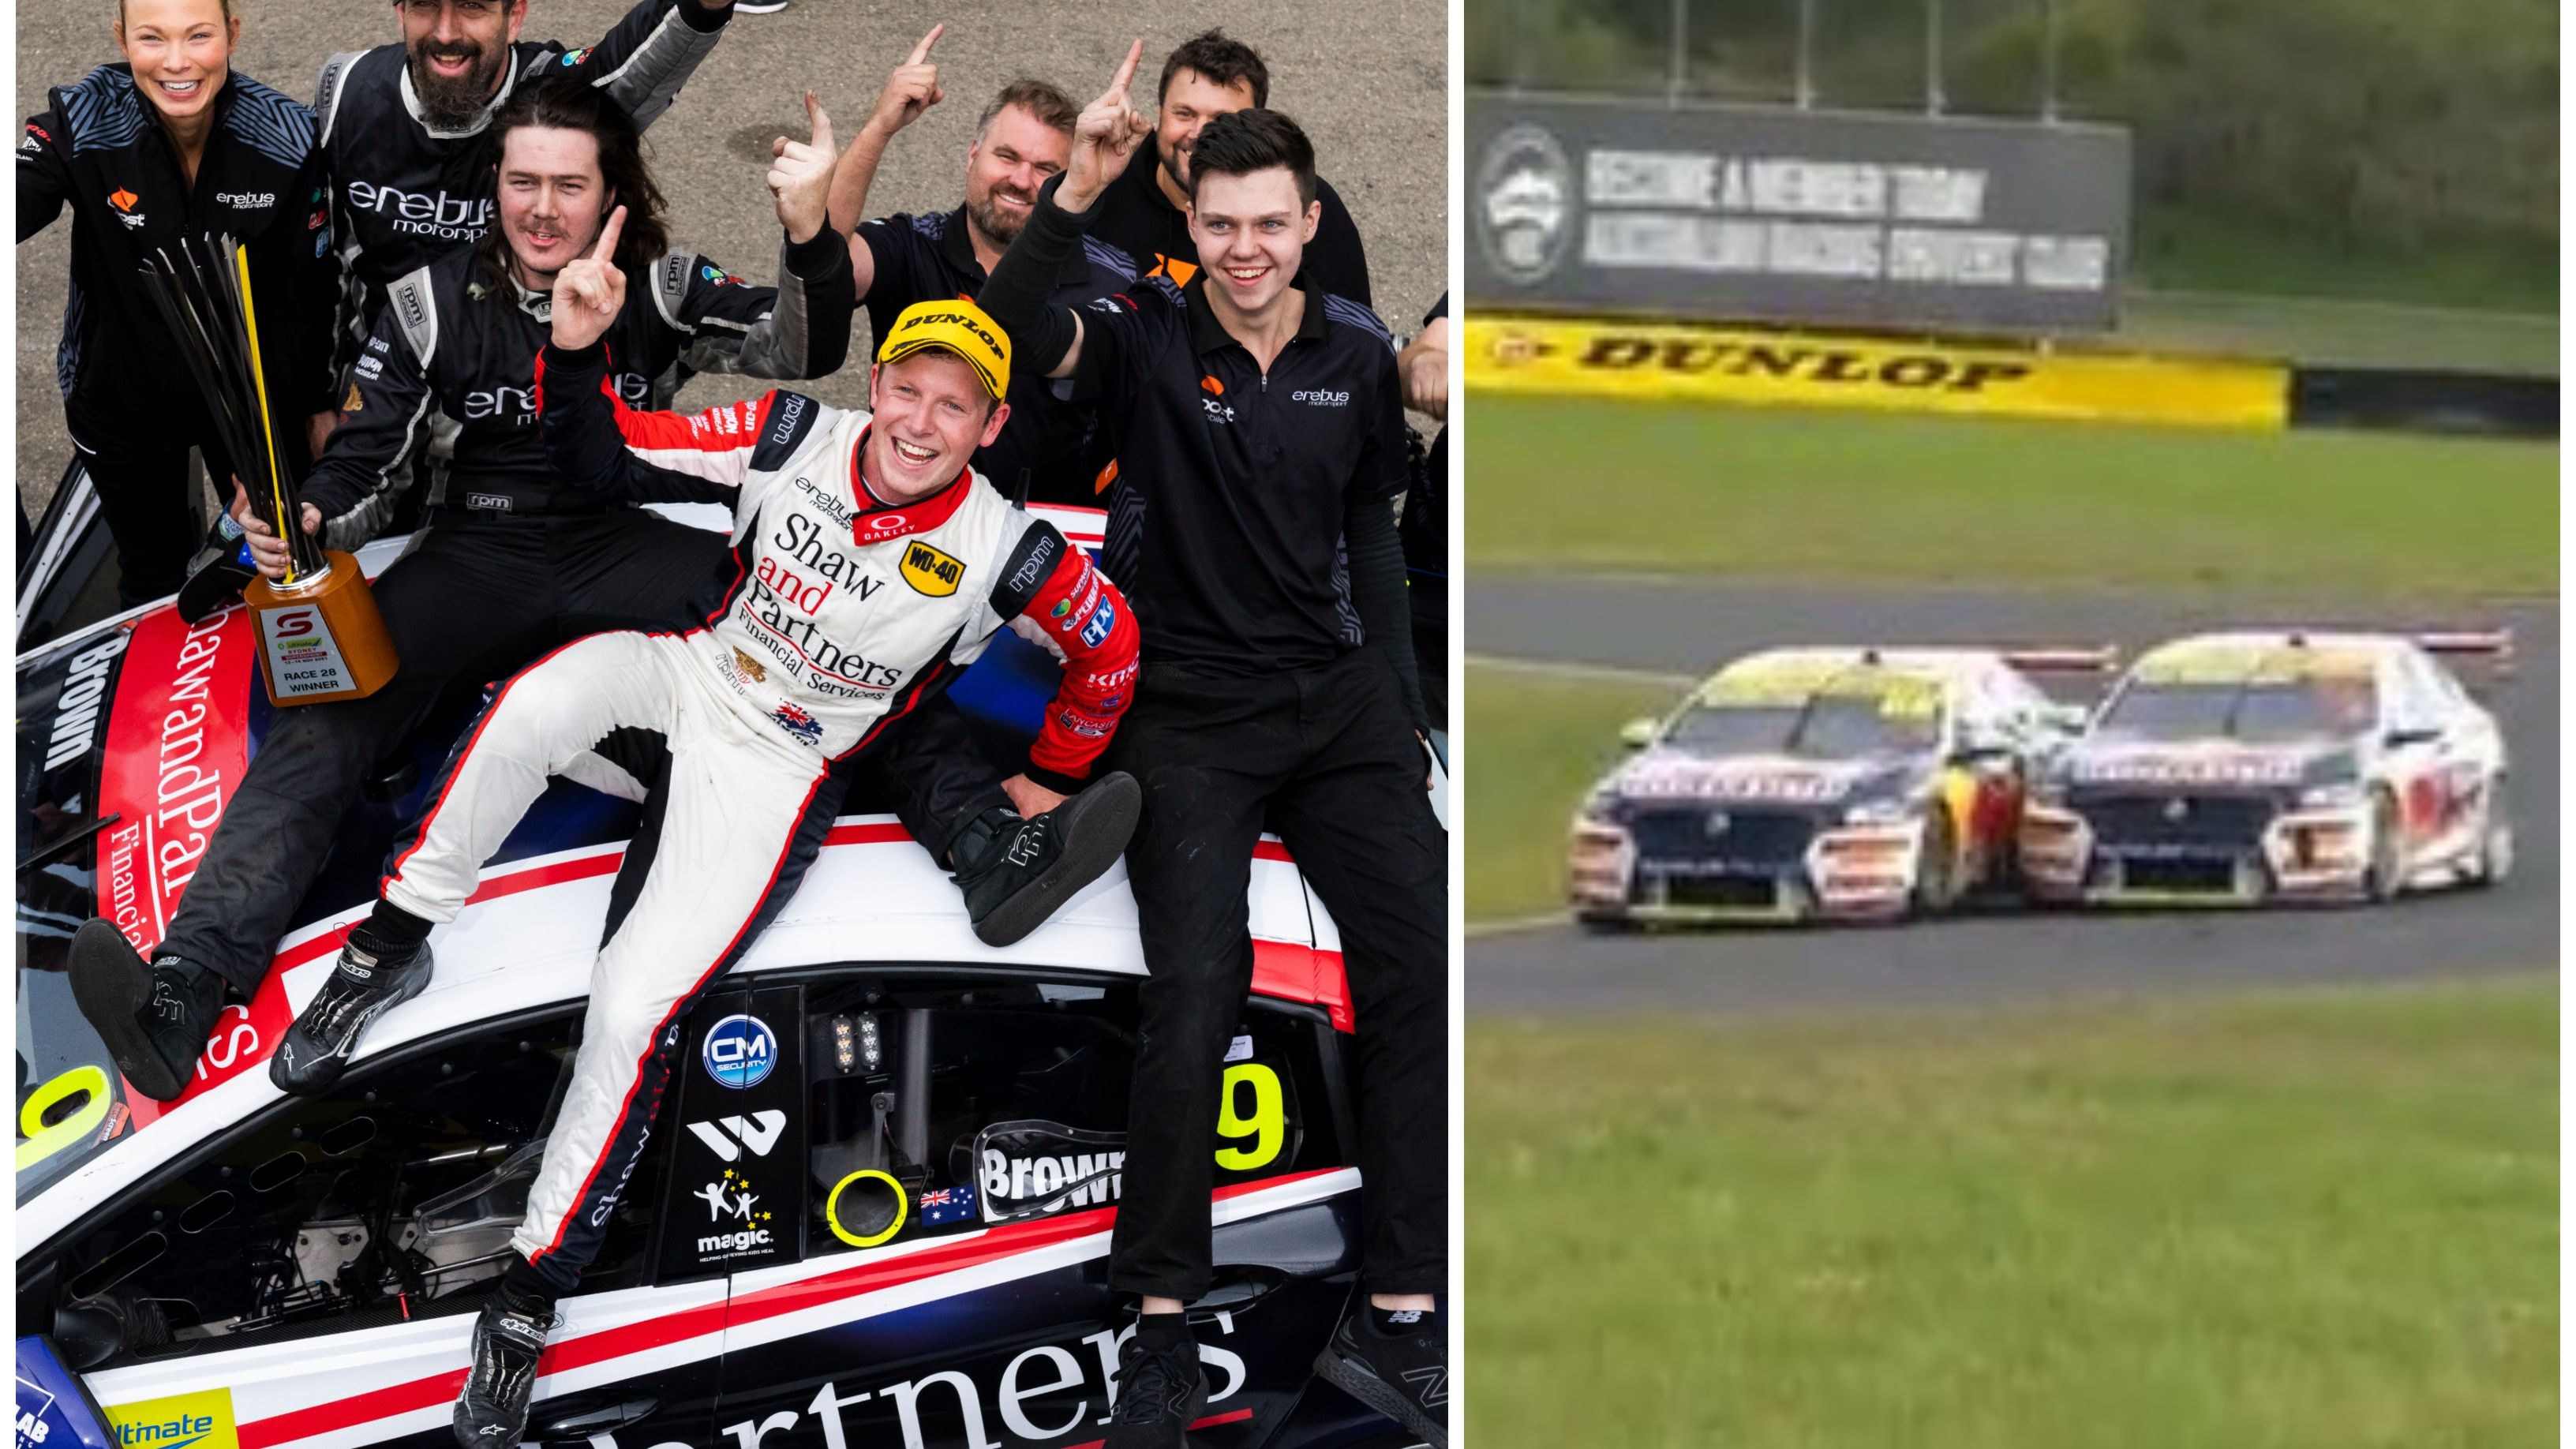 Will Brown celebrates, while Jamie Whincup and Shane van Gisbergen battle.